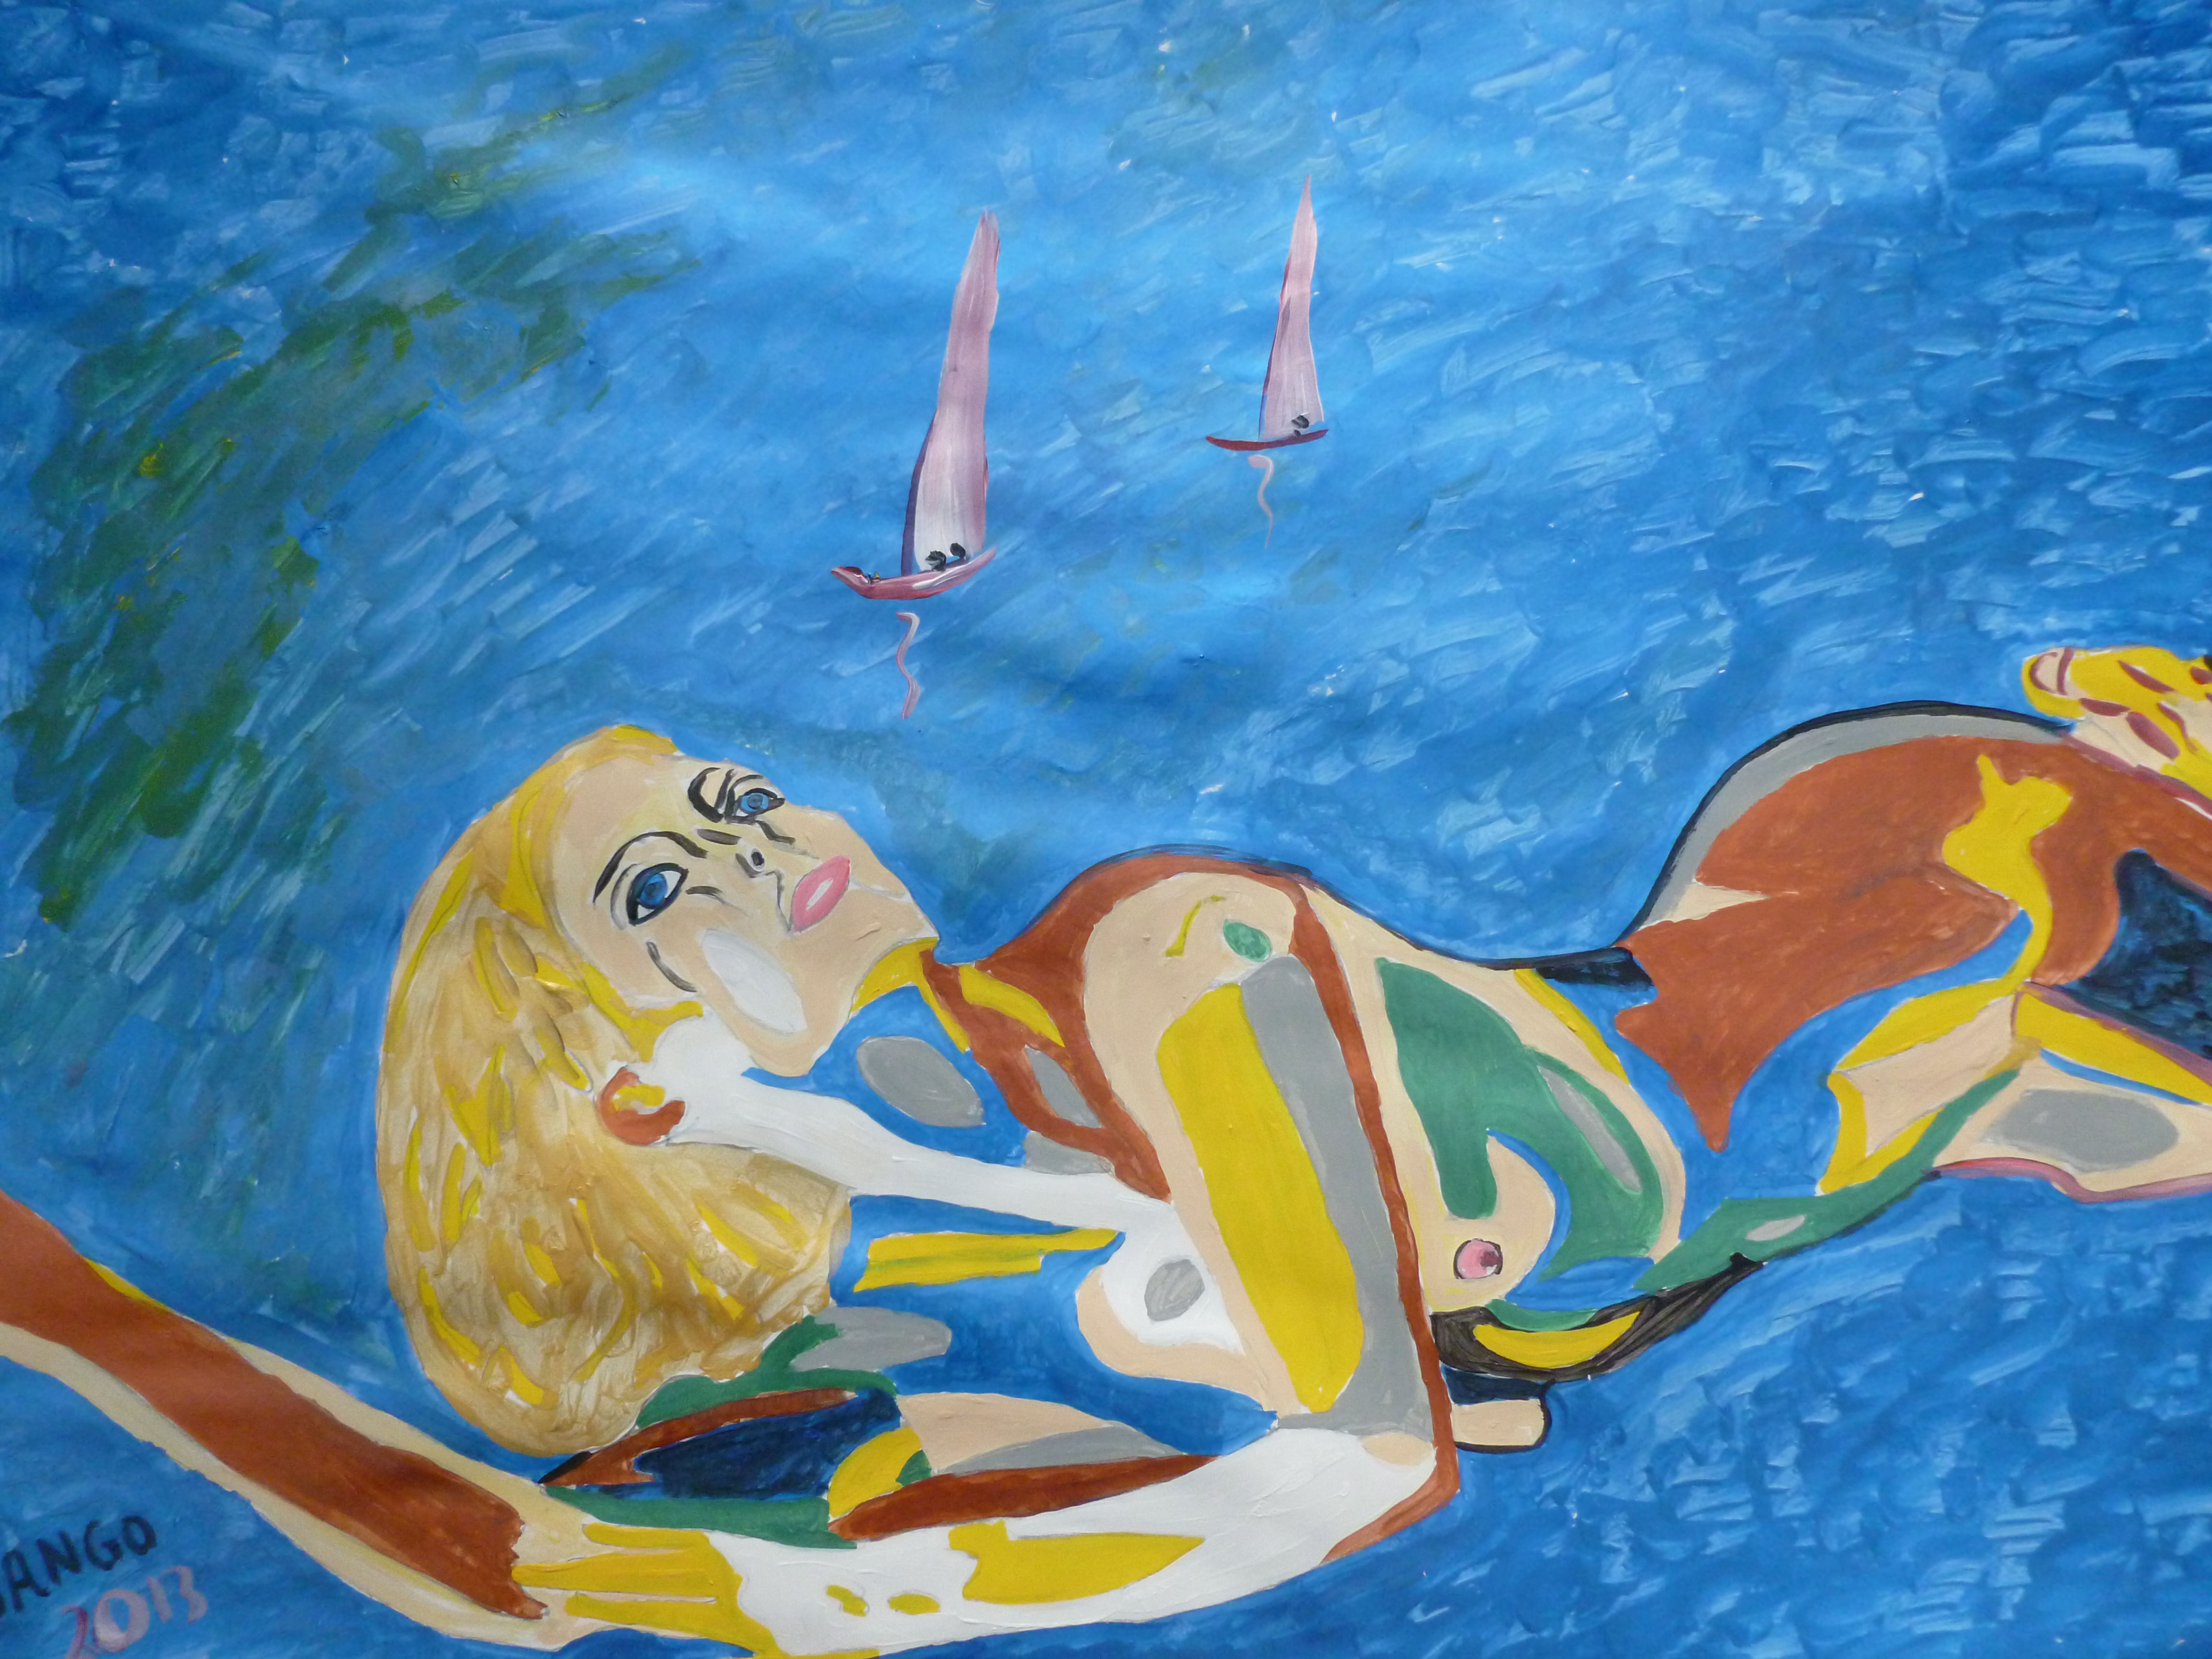 'Solent nude' by BB Bango 24 by 18 inch acrylic on canvas. Sold to art collector in UK